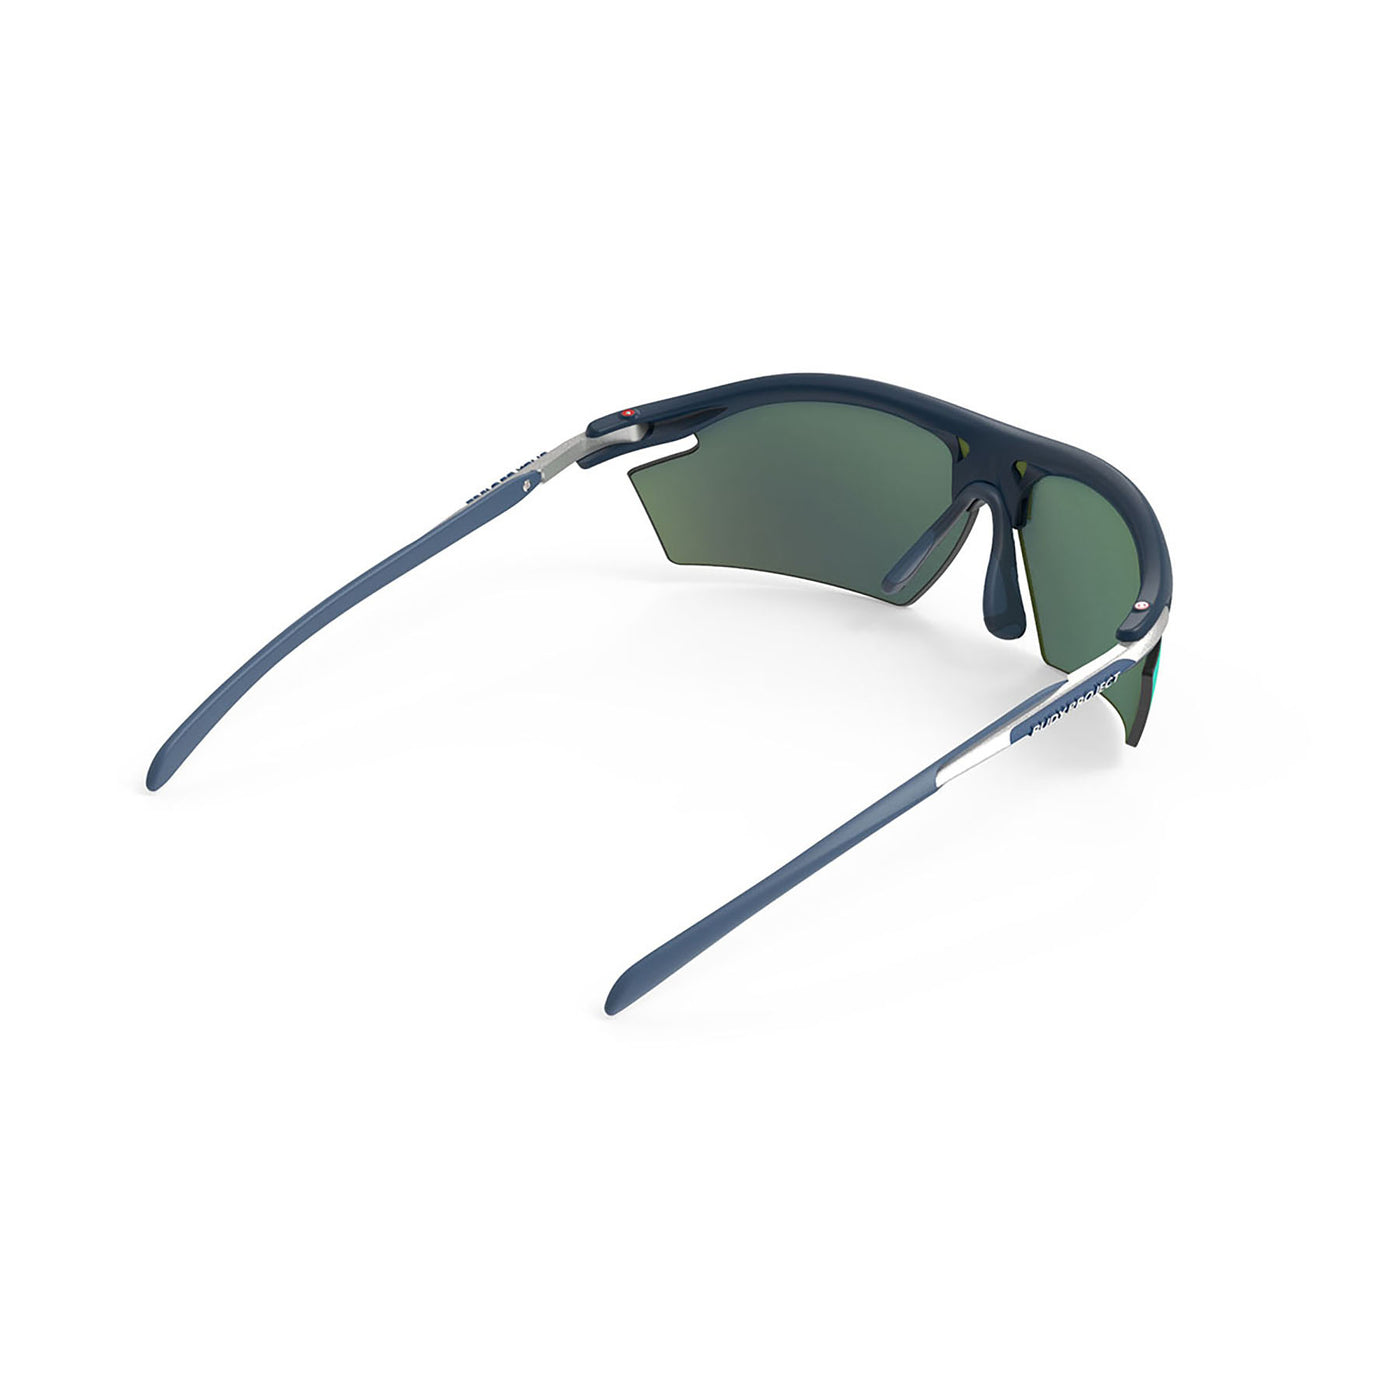 Rudy Project prescription ready running and cycling sunglasses#color_rydon-blue-navy-matte-frame-and-multilaser-blue-lenses